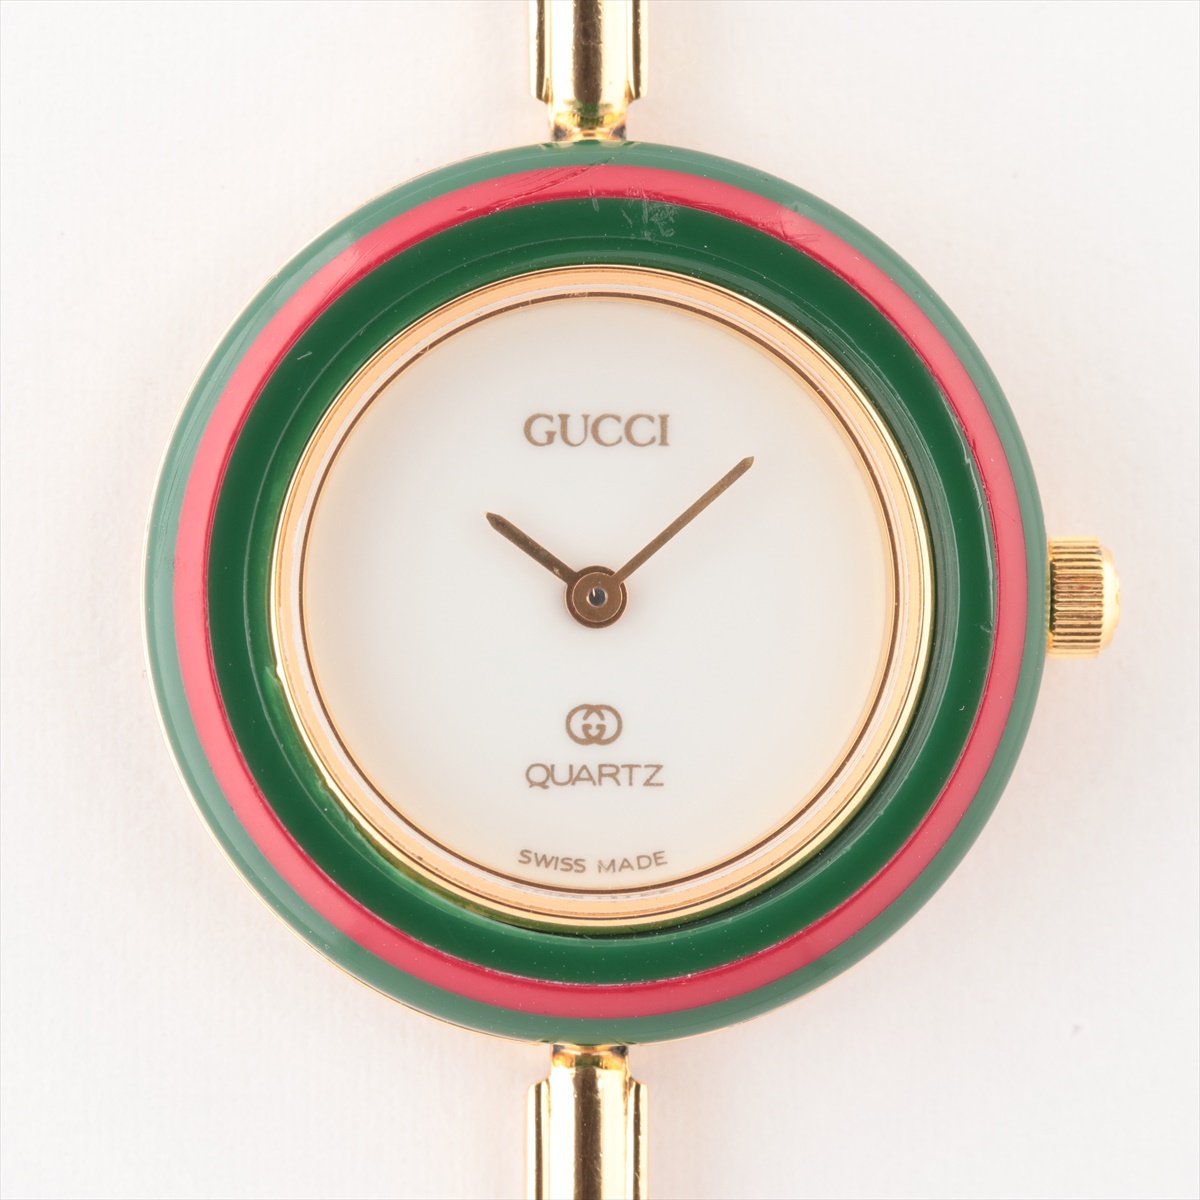 Gucci change Bezel 1100L Gold Plated QZ white dial inner box only with